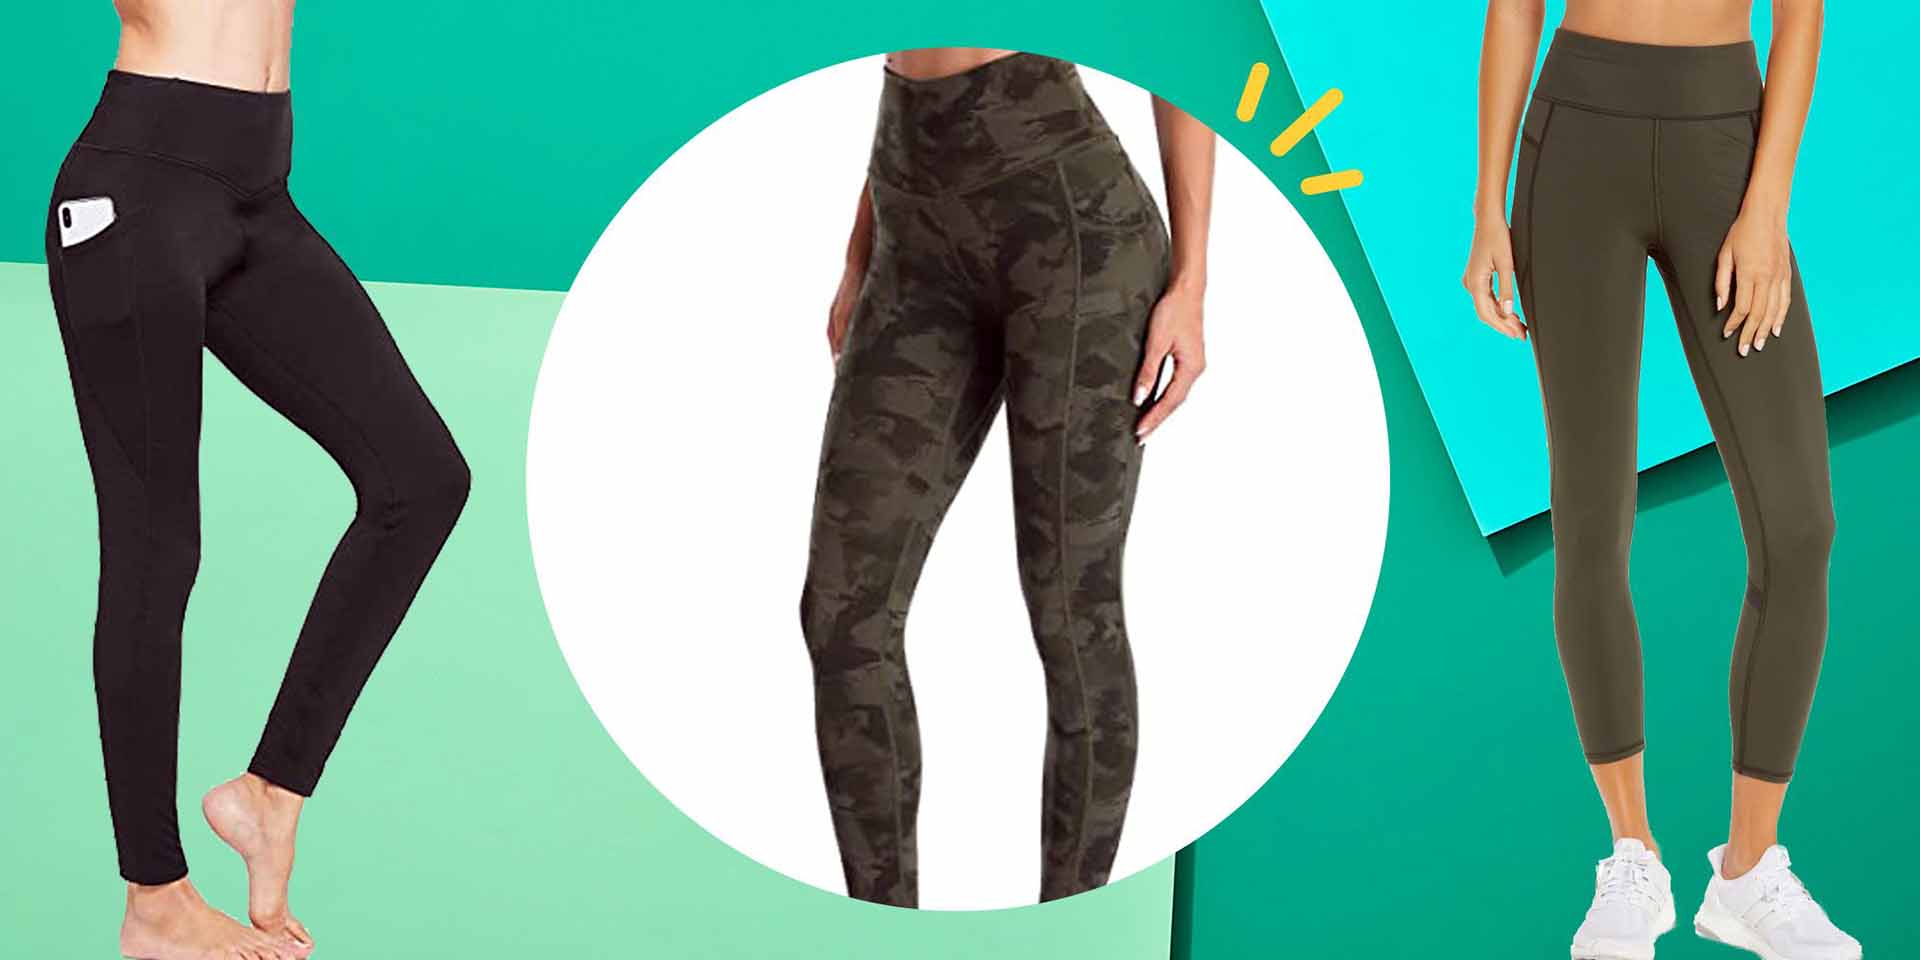 7 Things to Look for When Buying Workout Leggings - The Tiger News